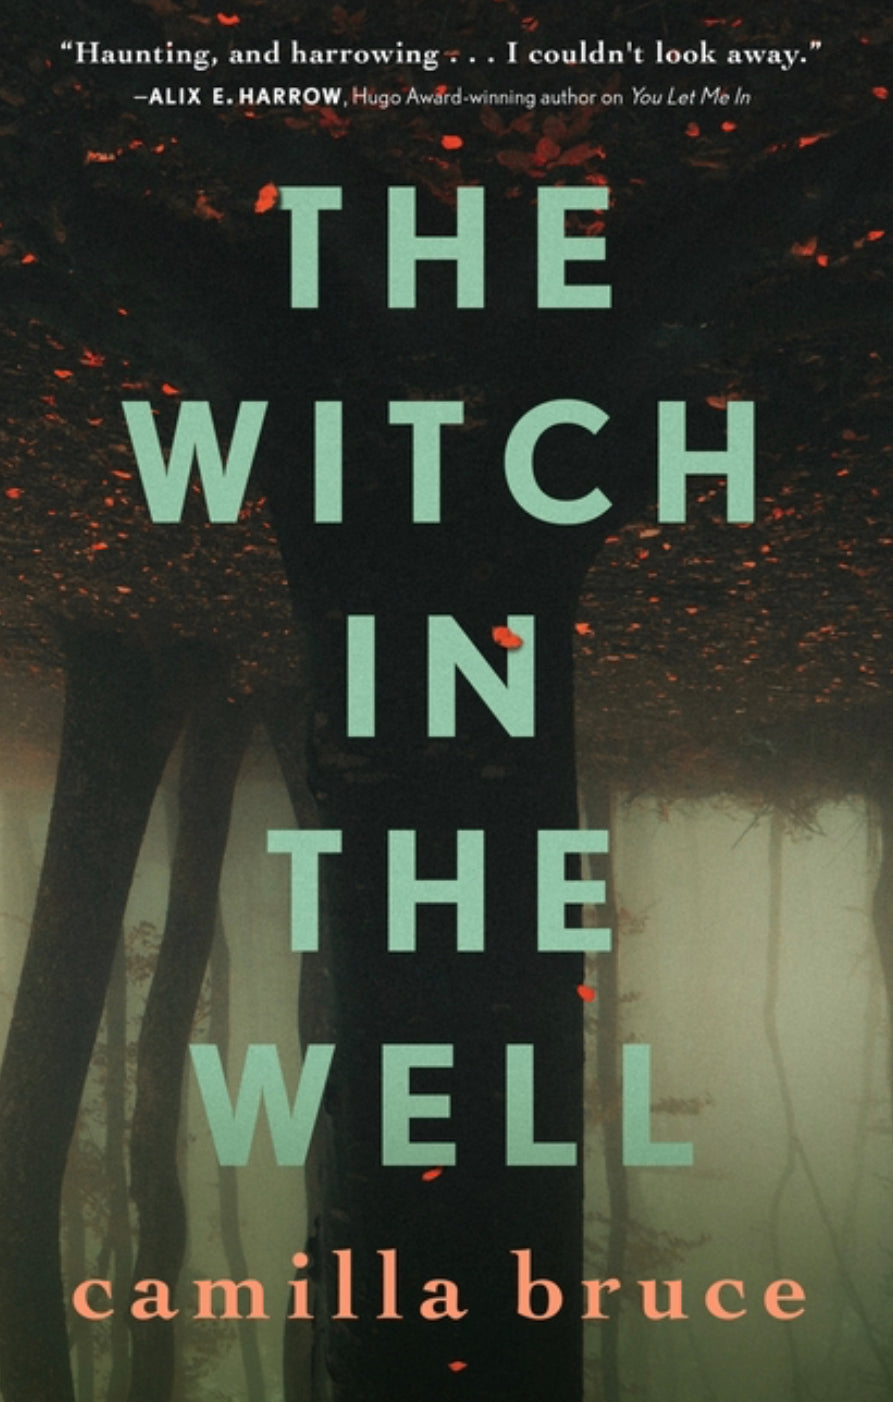 The Witch In The Well - Camilla Bruce